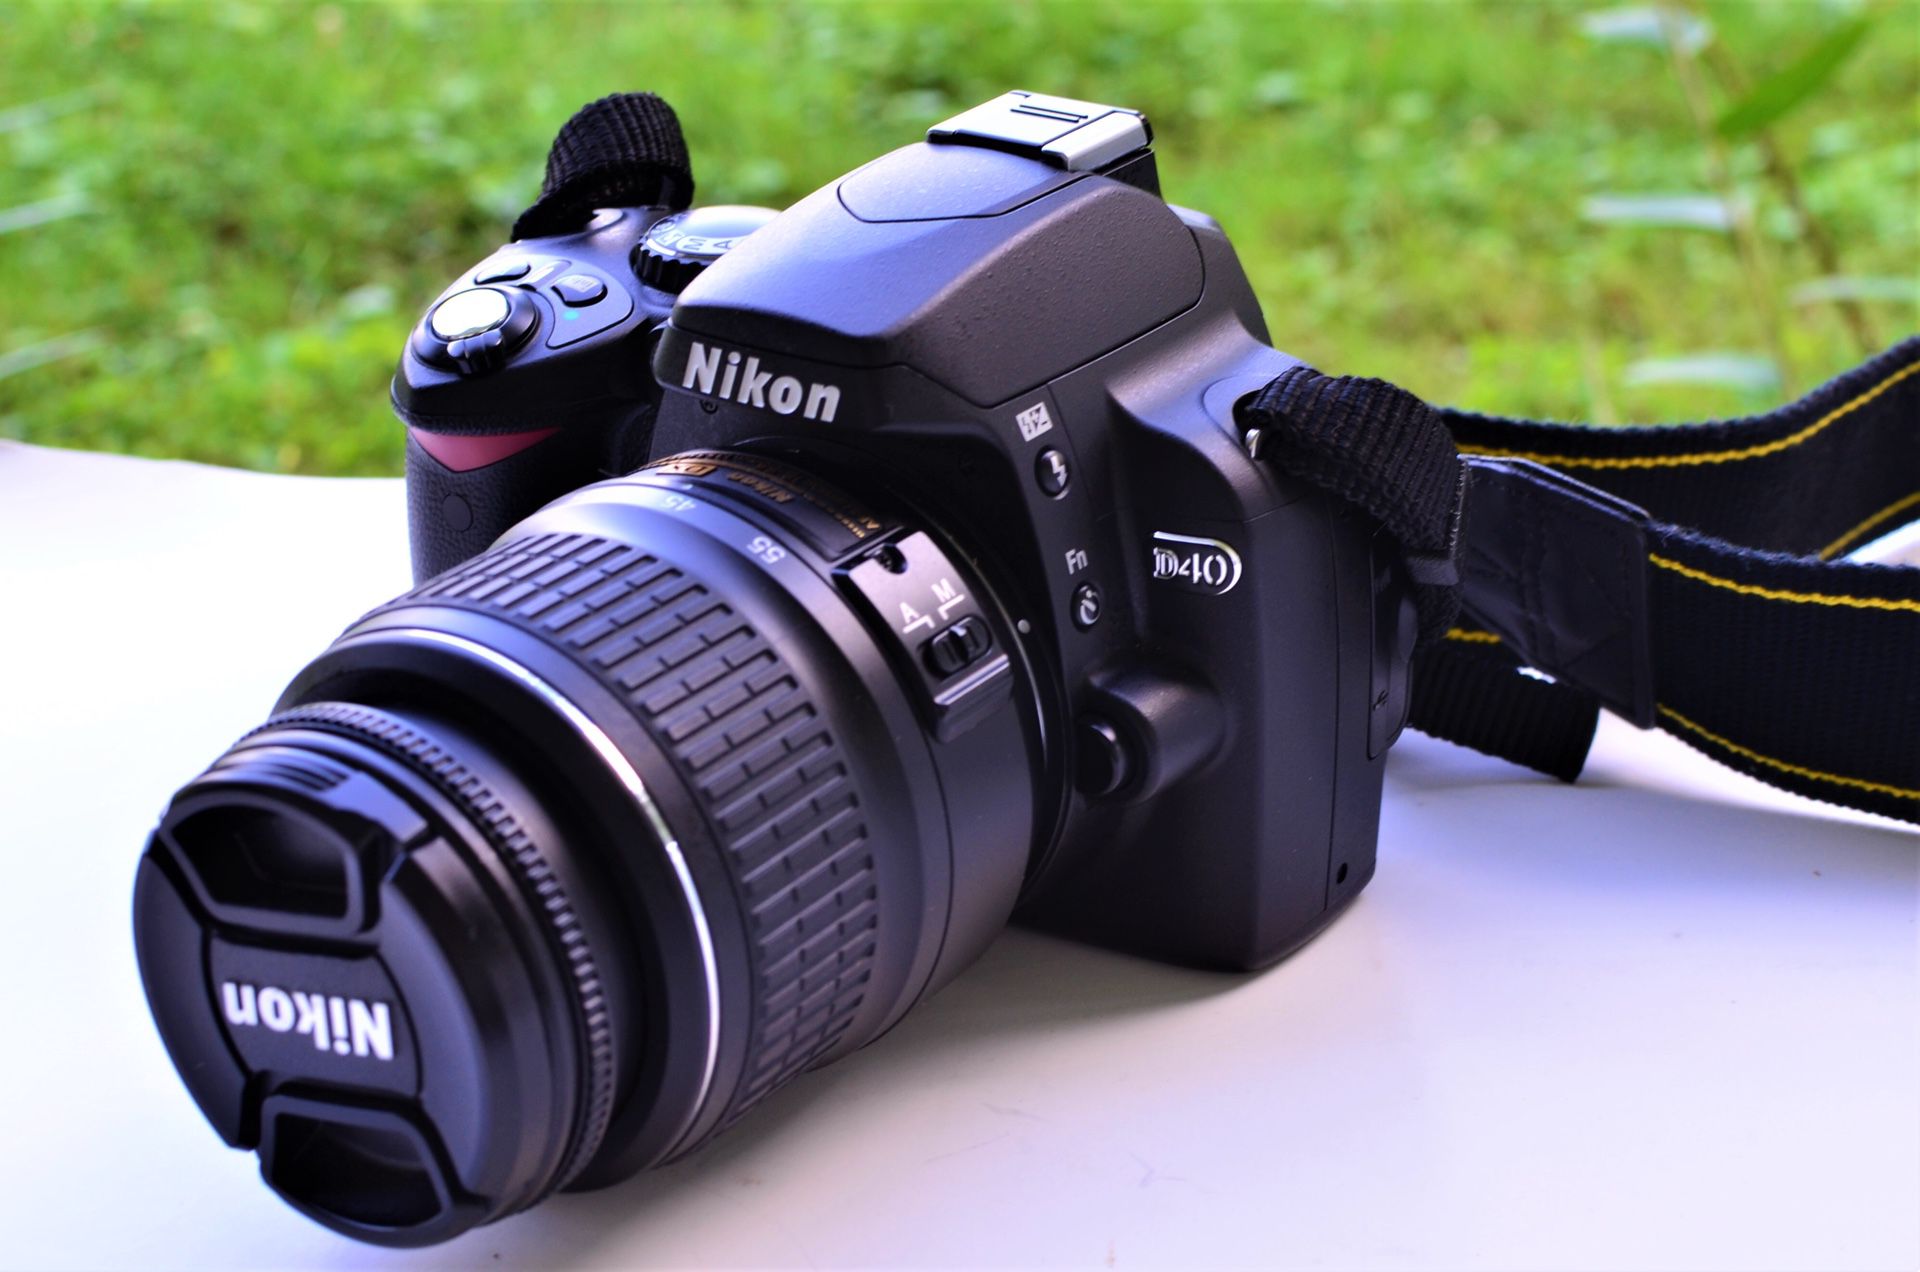 Barely Used Nikon D40 DSLR Camera With Lens